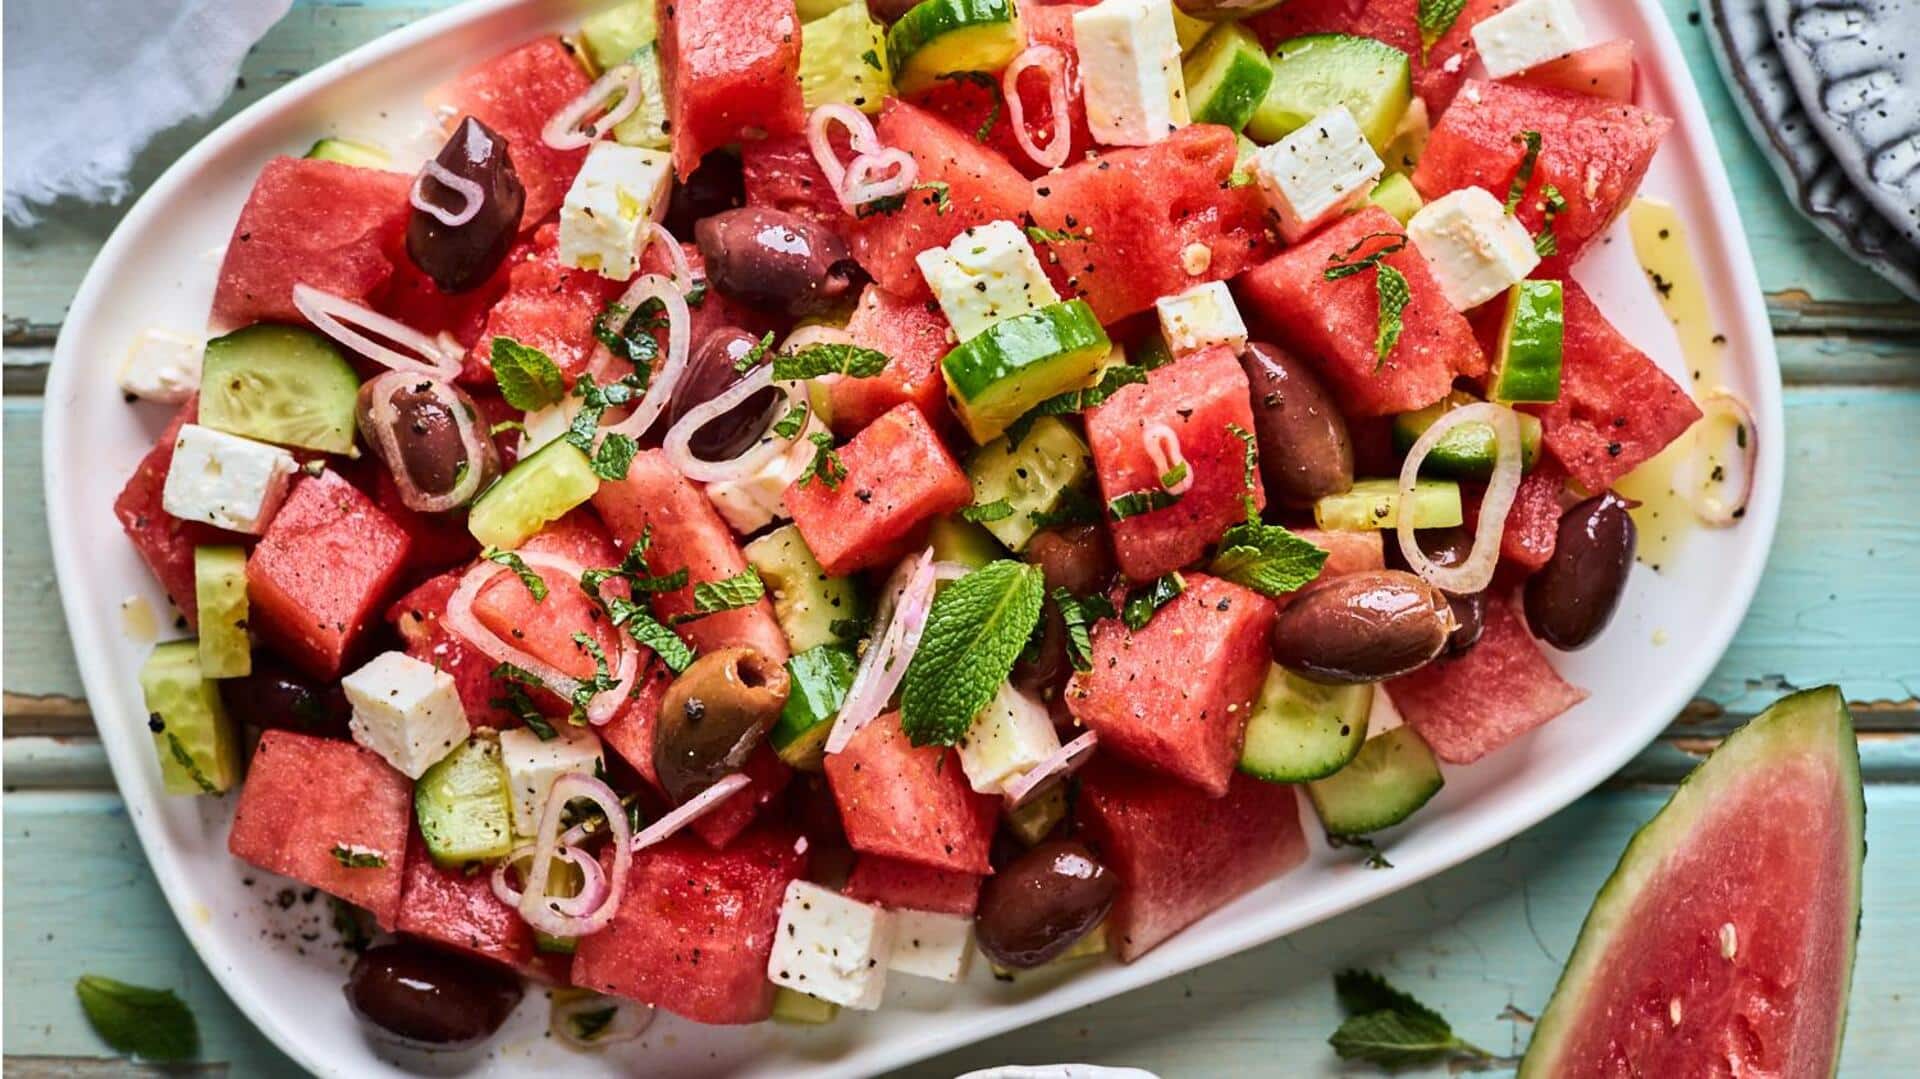 Freshen up your day with this watermelon feta salad recipe